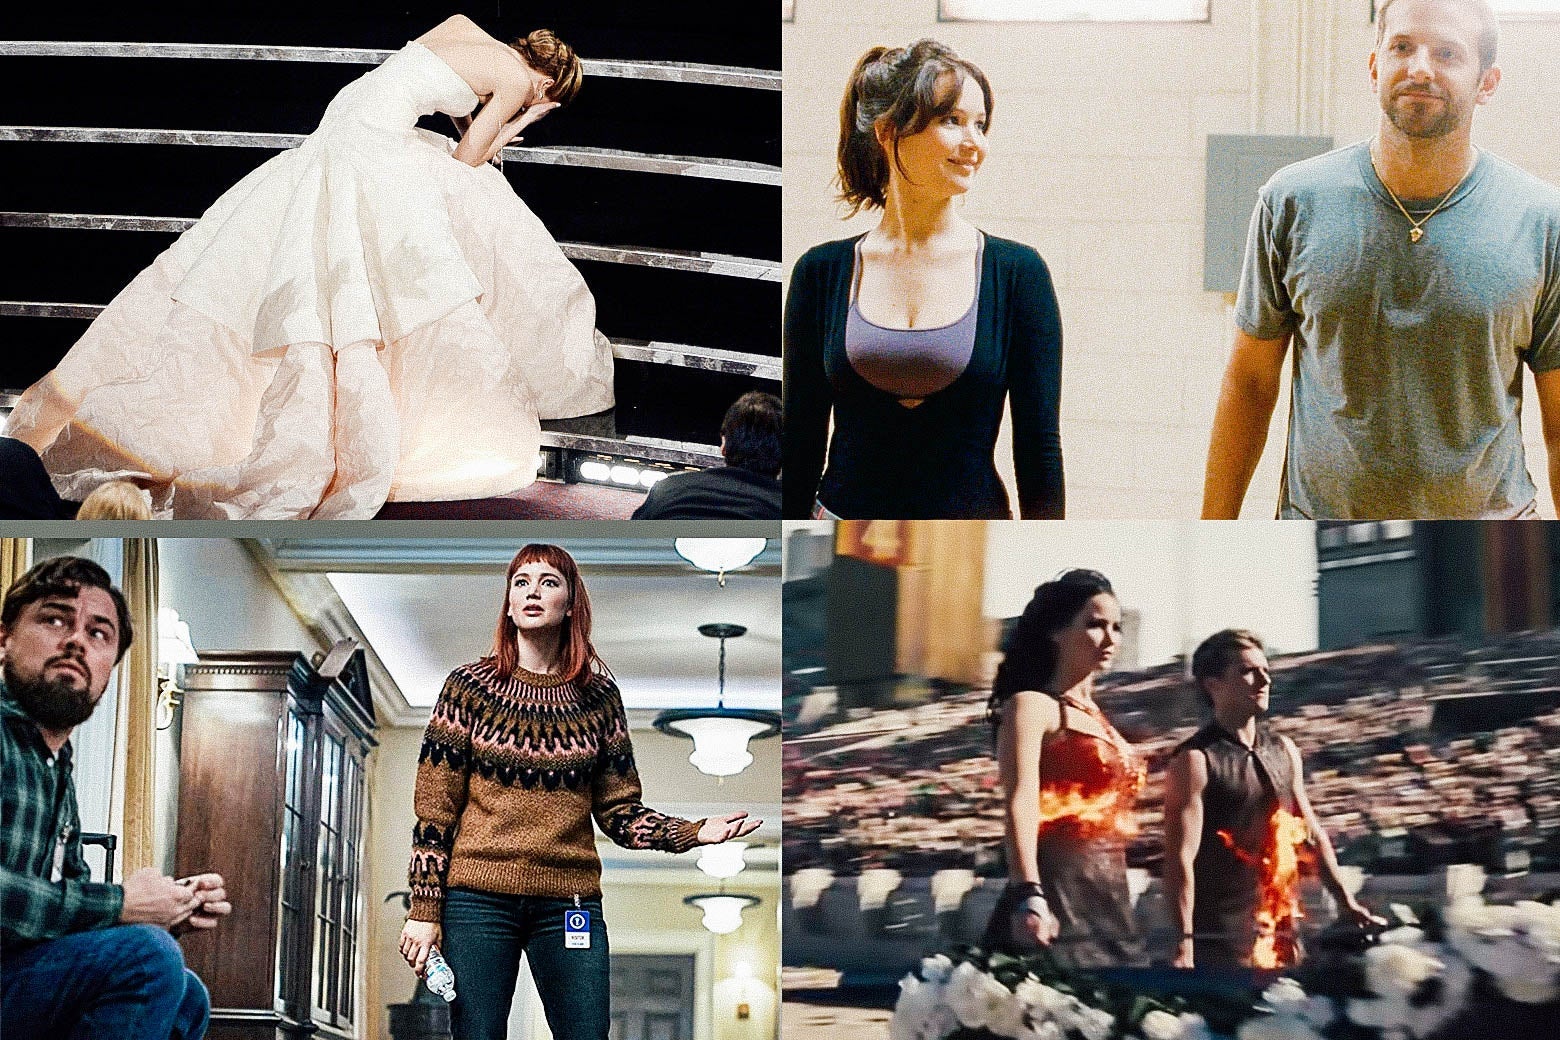 Jennifer Lawrence at the 2013 Oscars, in Silver Linings Playbook, in Don't Look Up, and in The Hunger Games.